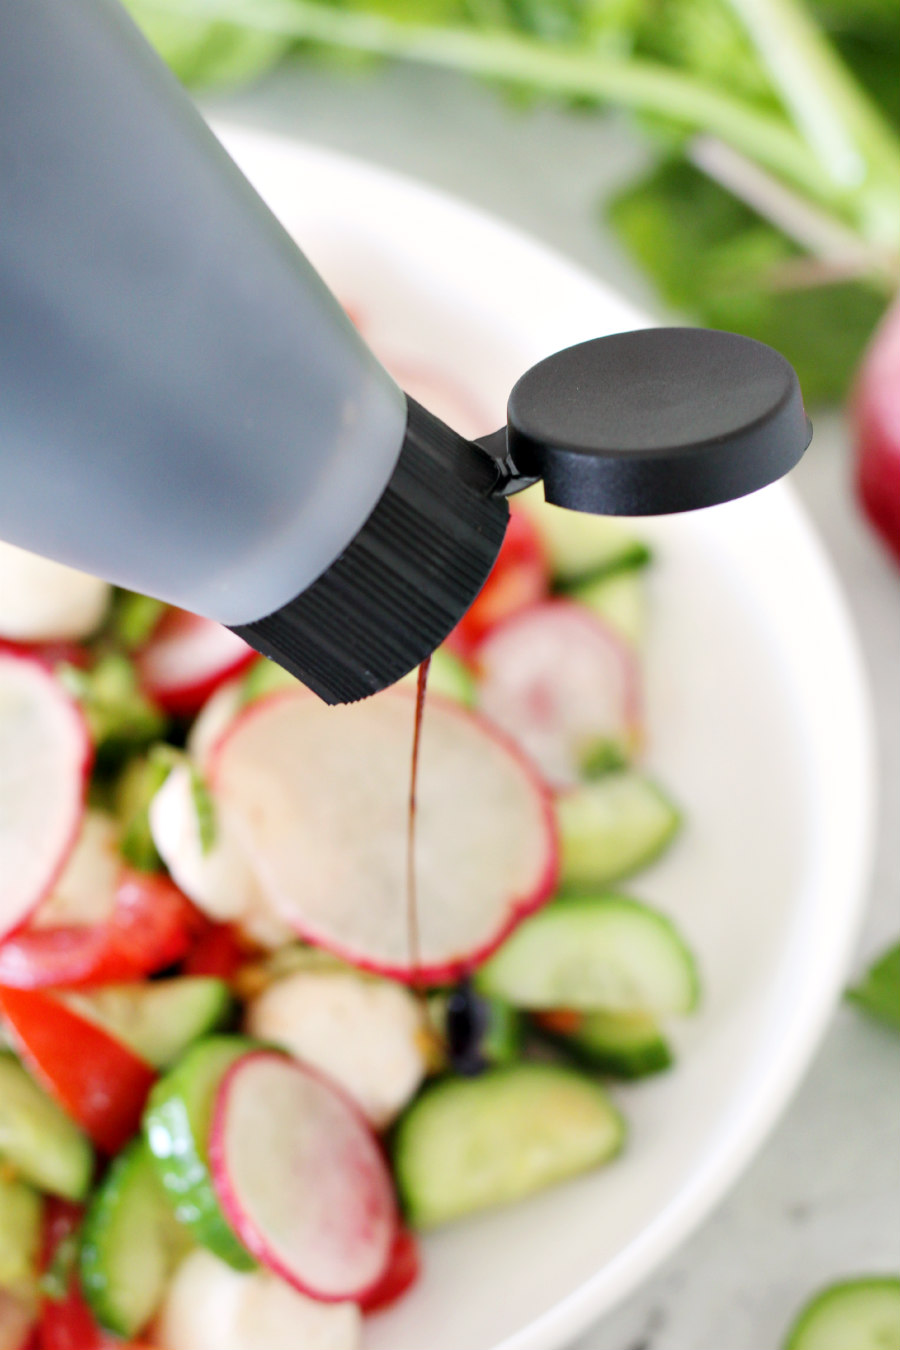 Balsamic glaze being drizzled over the top of Tomato, Cucumber, and Radish Salad.